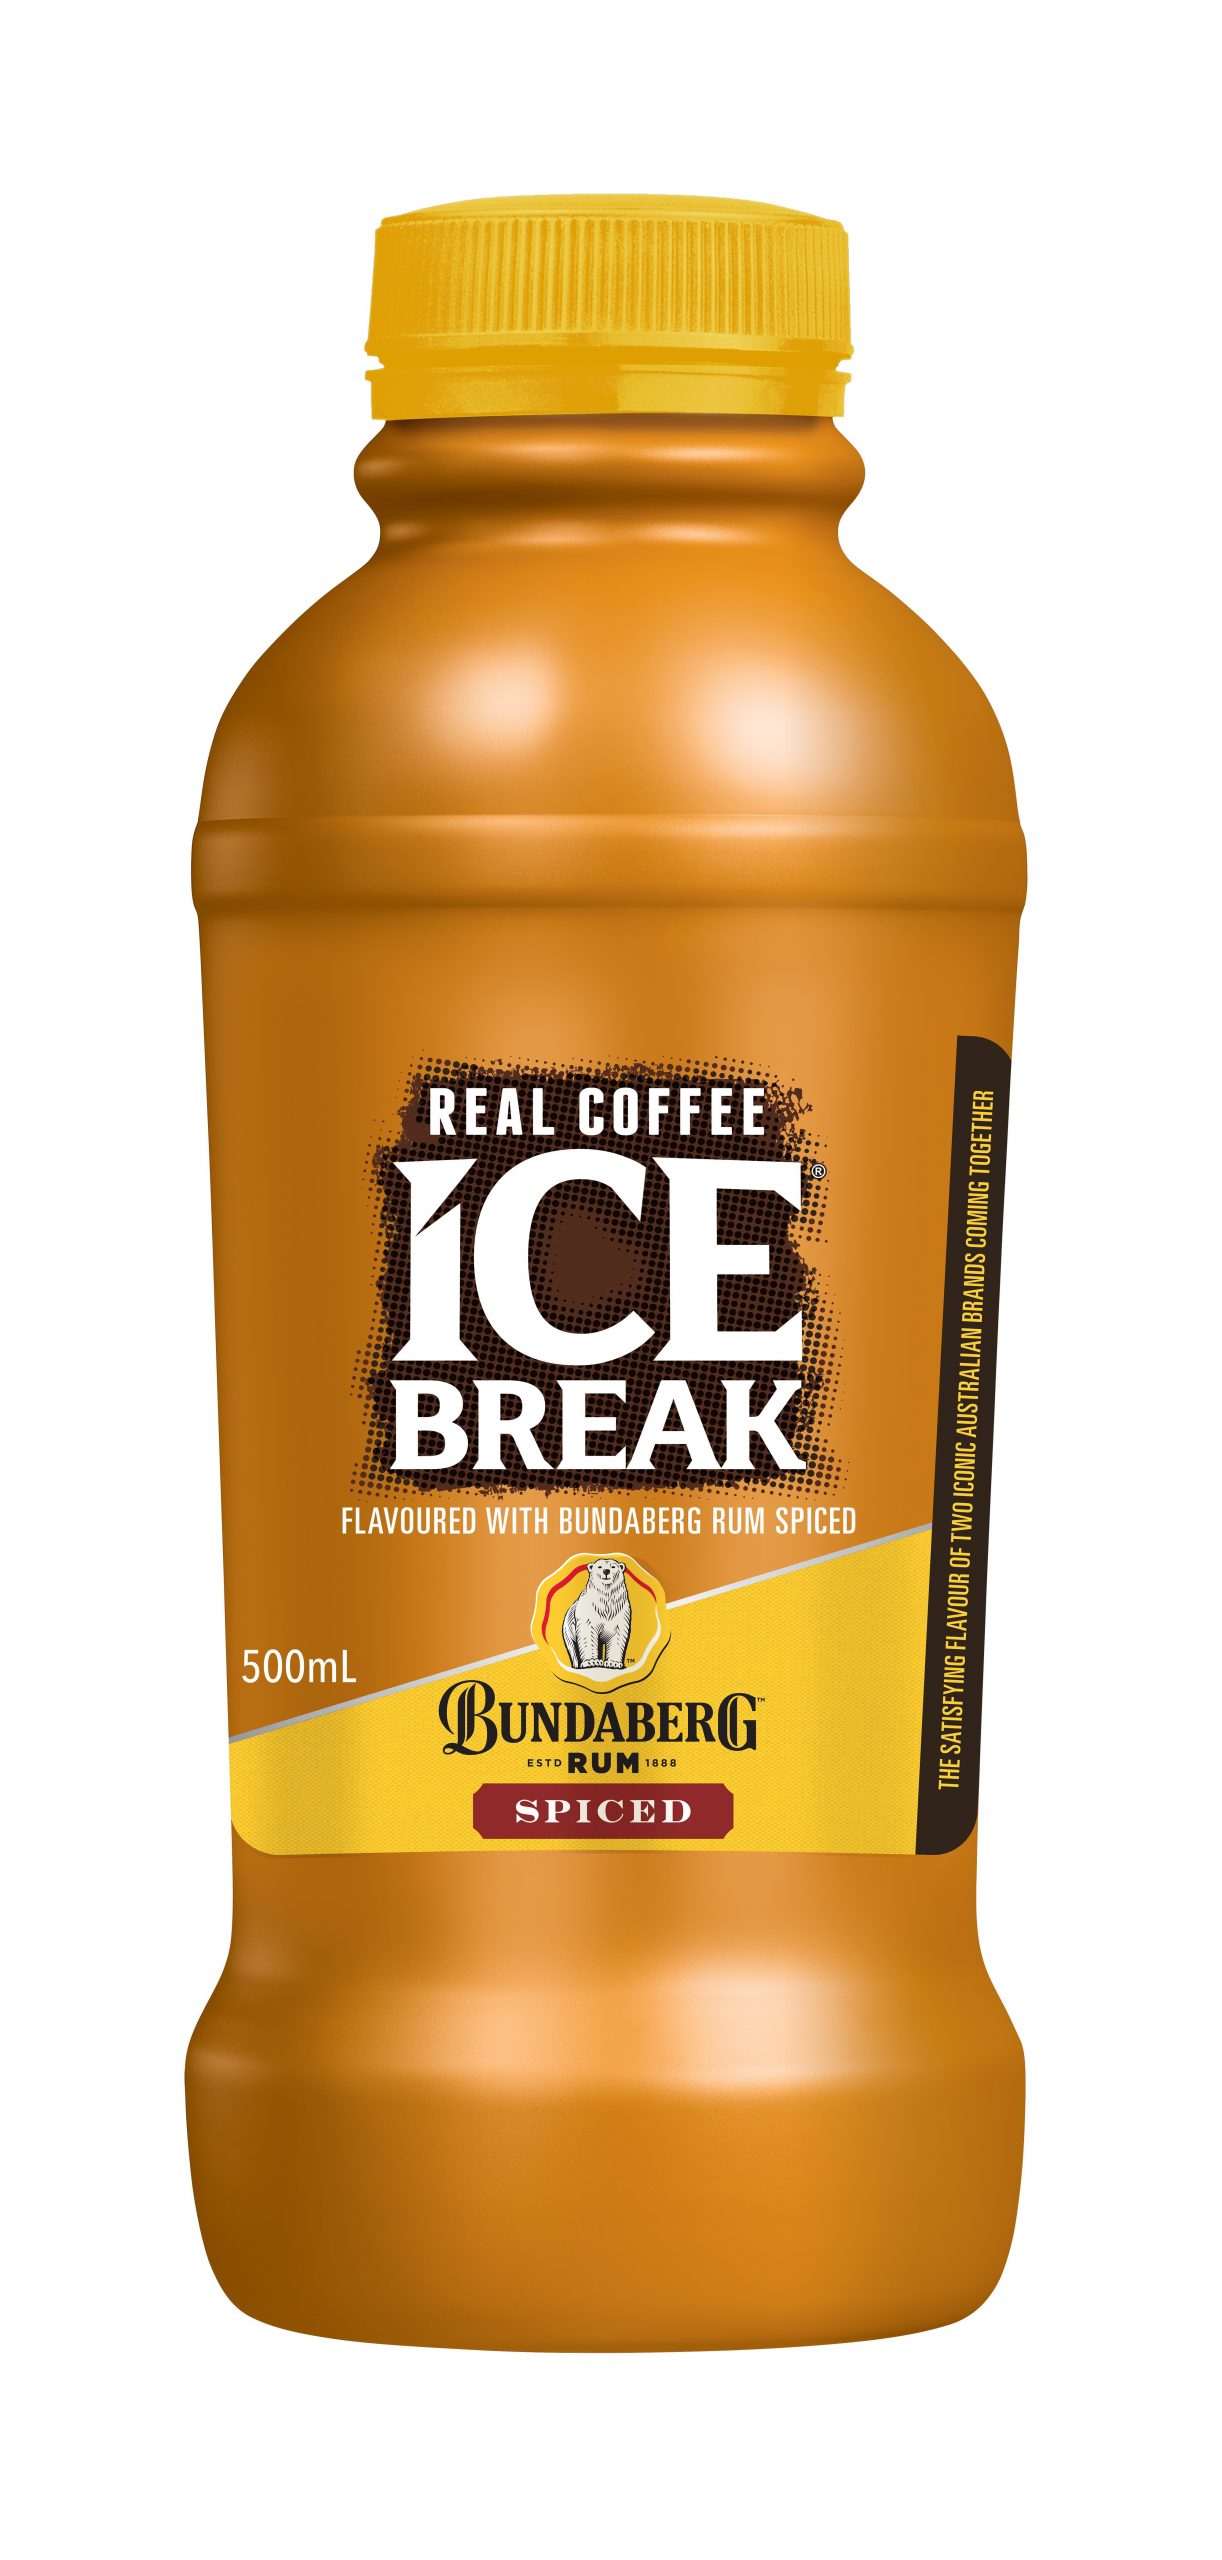 Assembl Partners Bundaberg Rum With Ice Break Iced Coffee For New Nationwide Flavor image